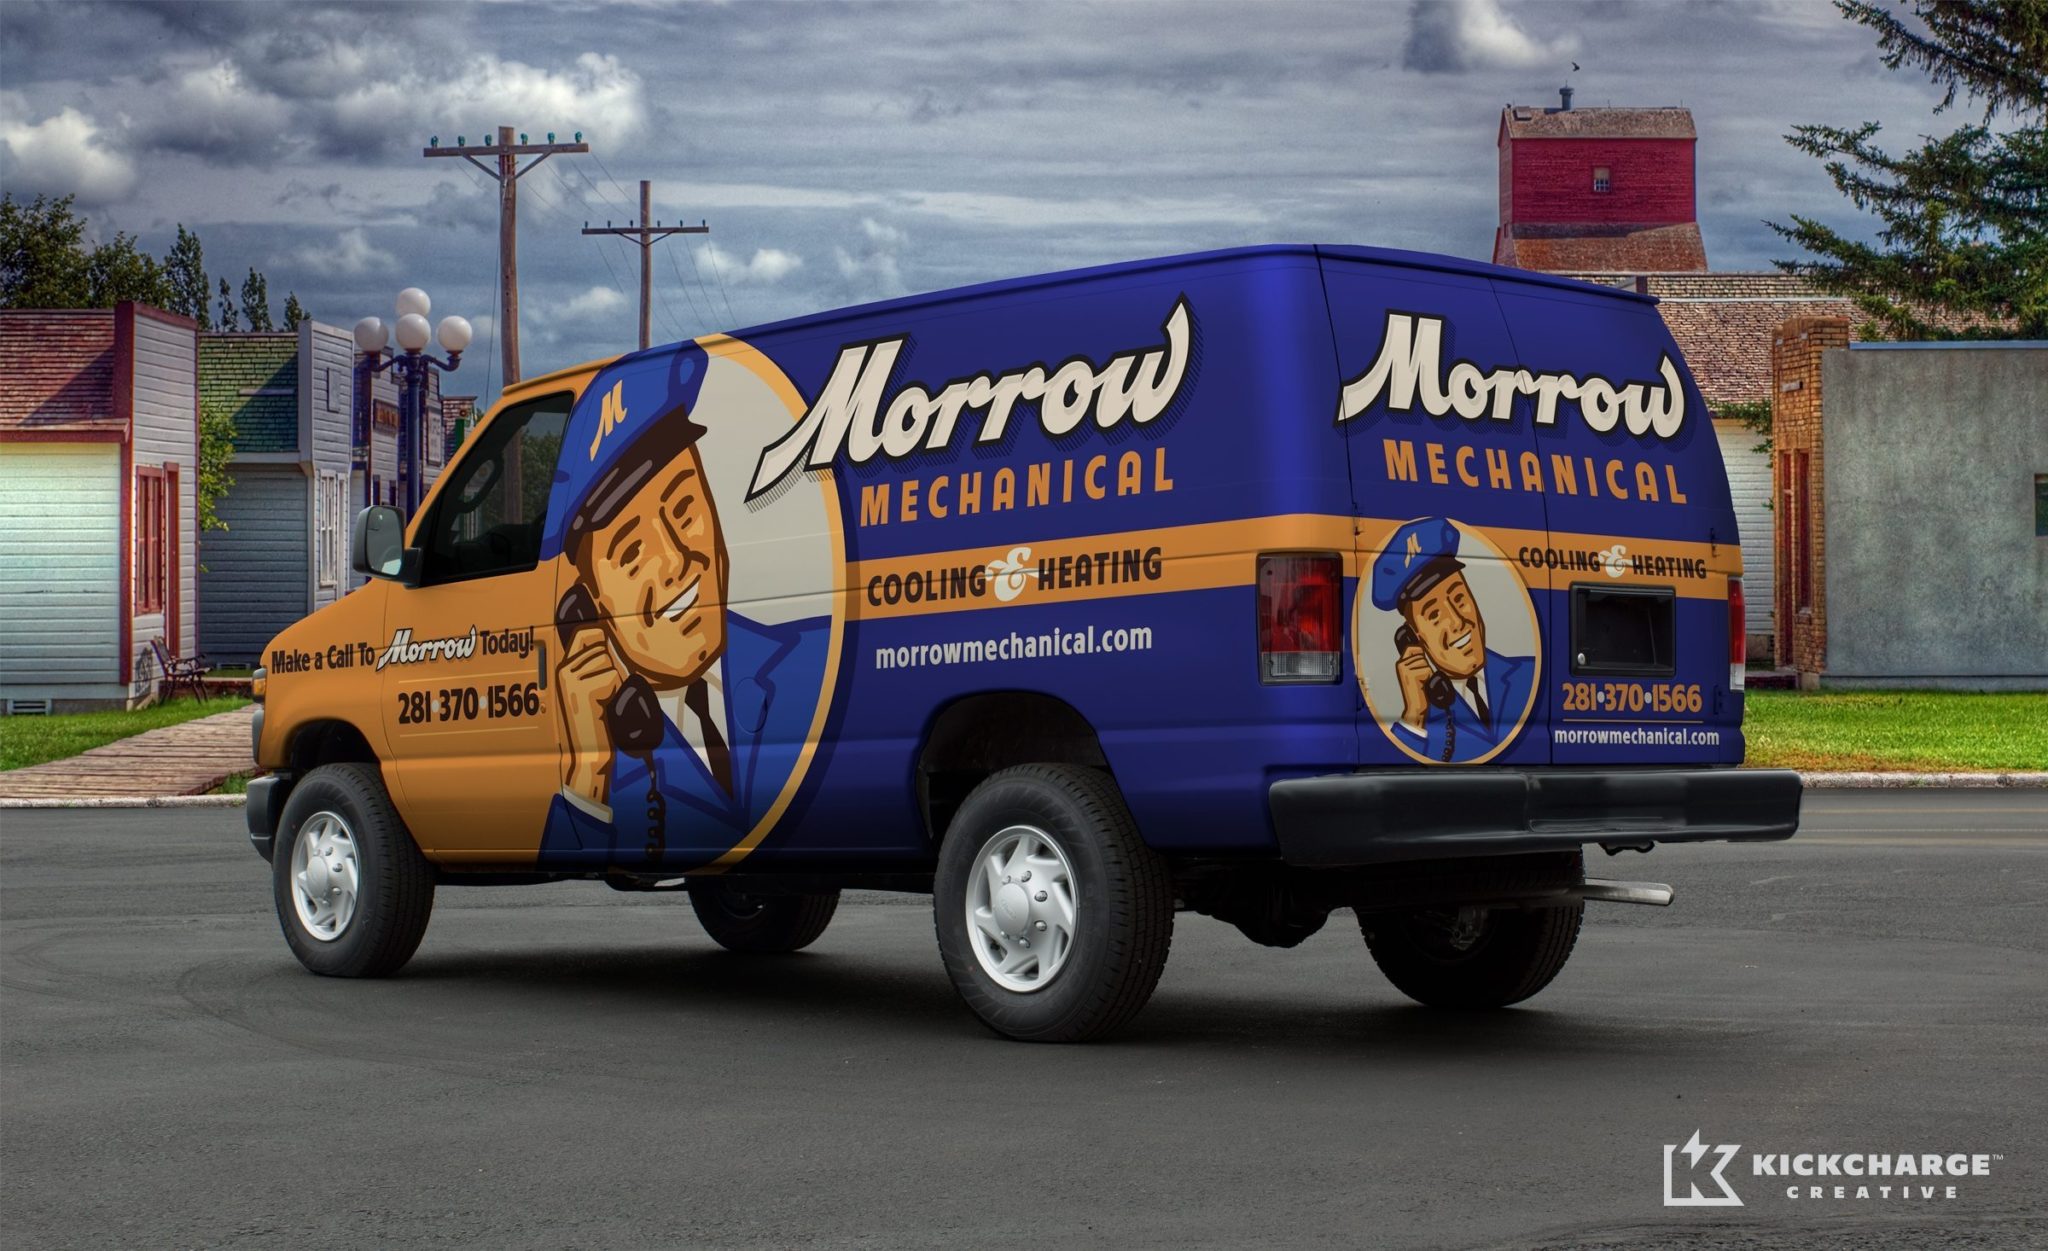 Retro vehicle wrap design for a cooling & heating company based in Texas.